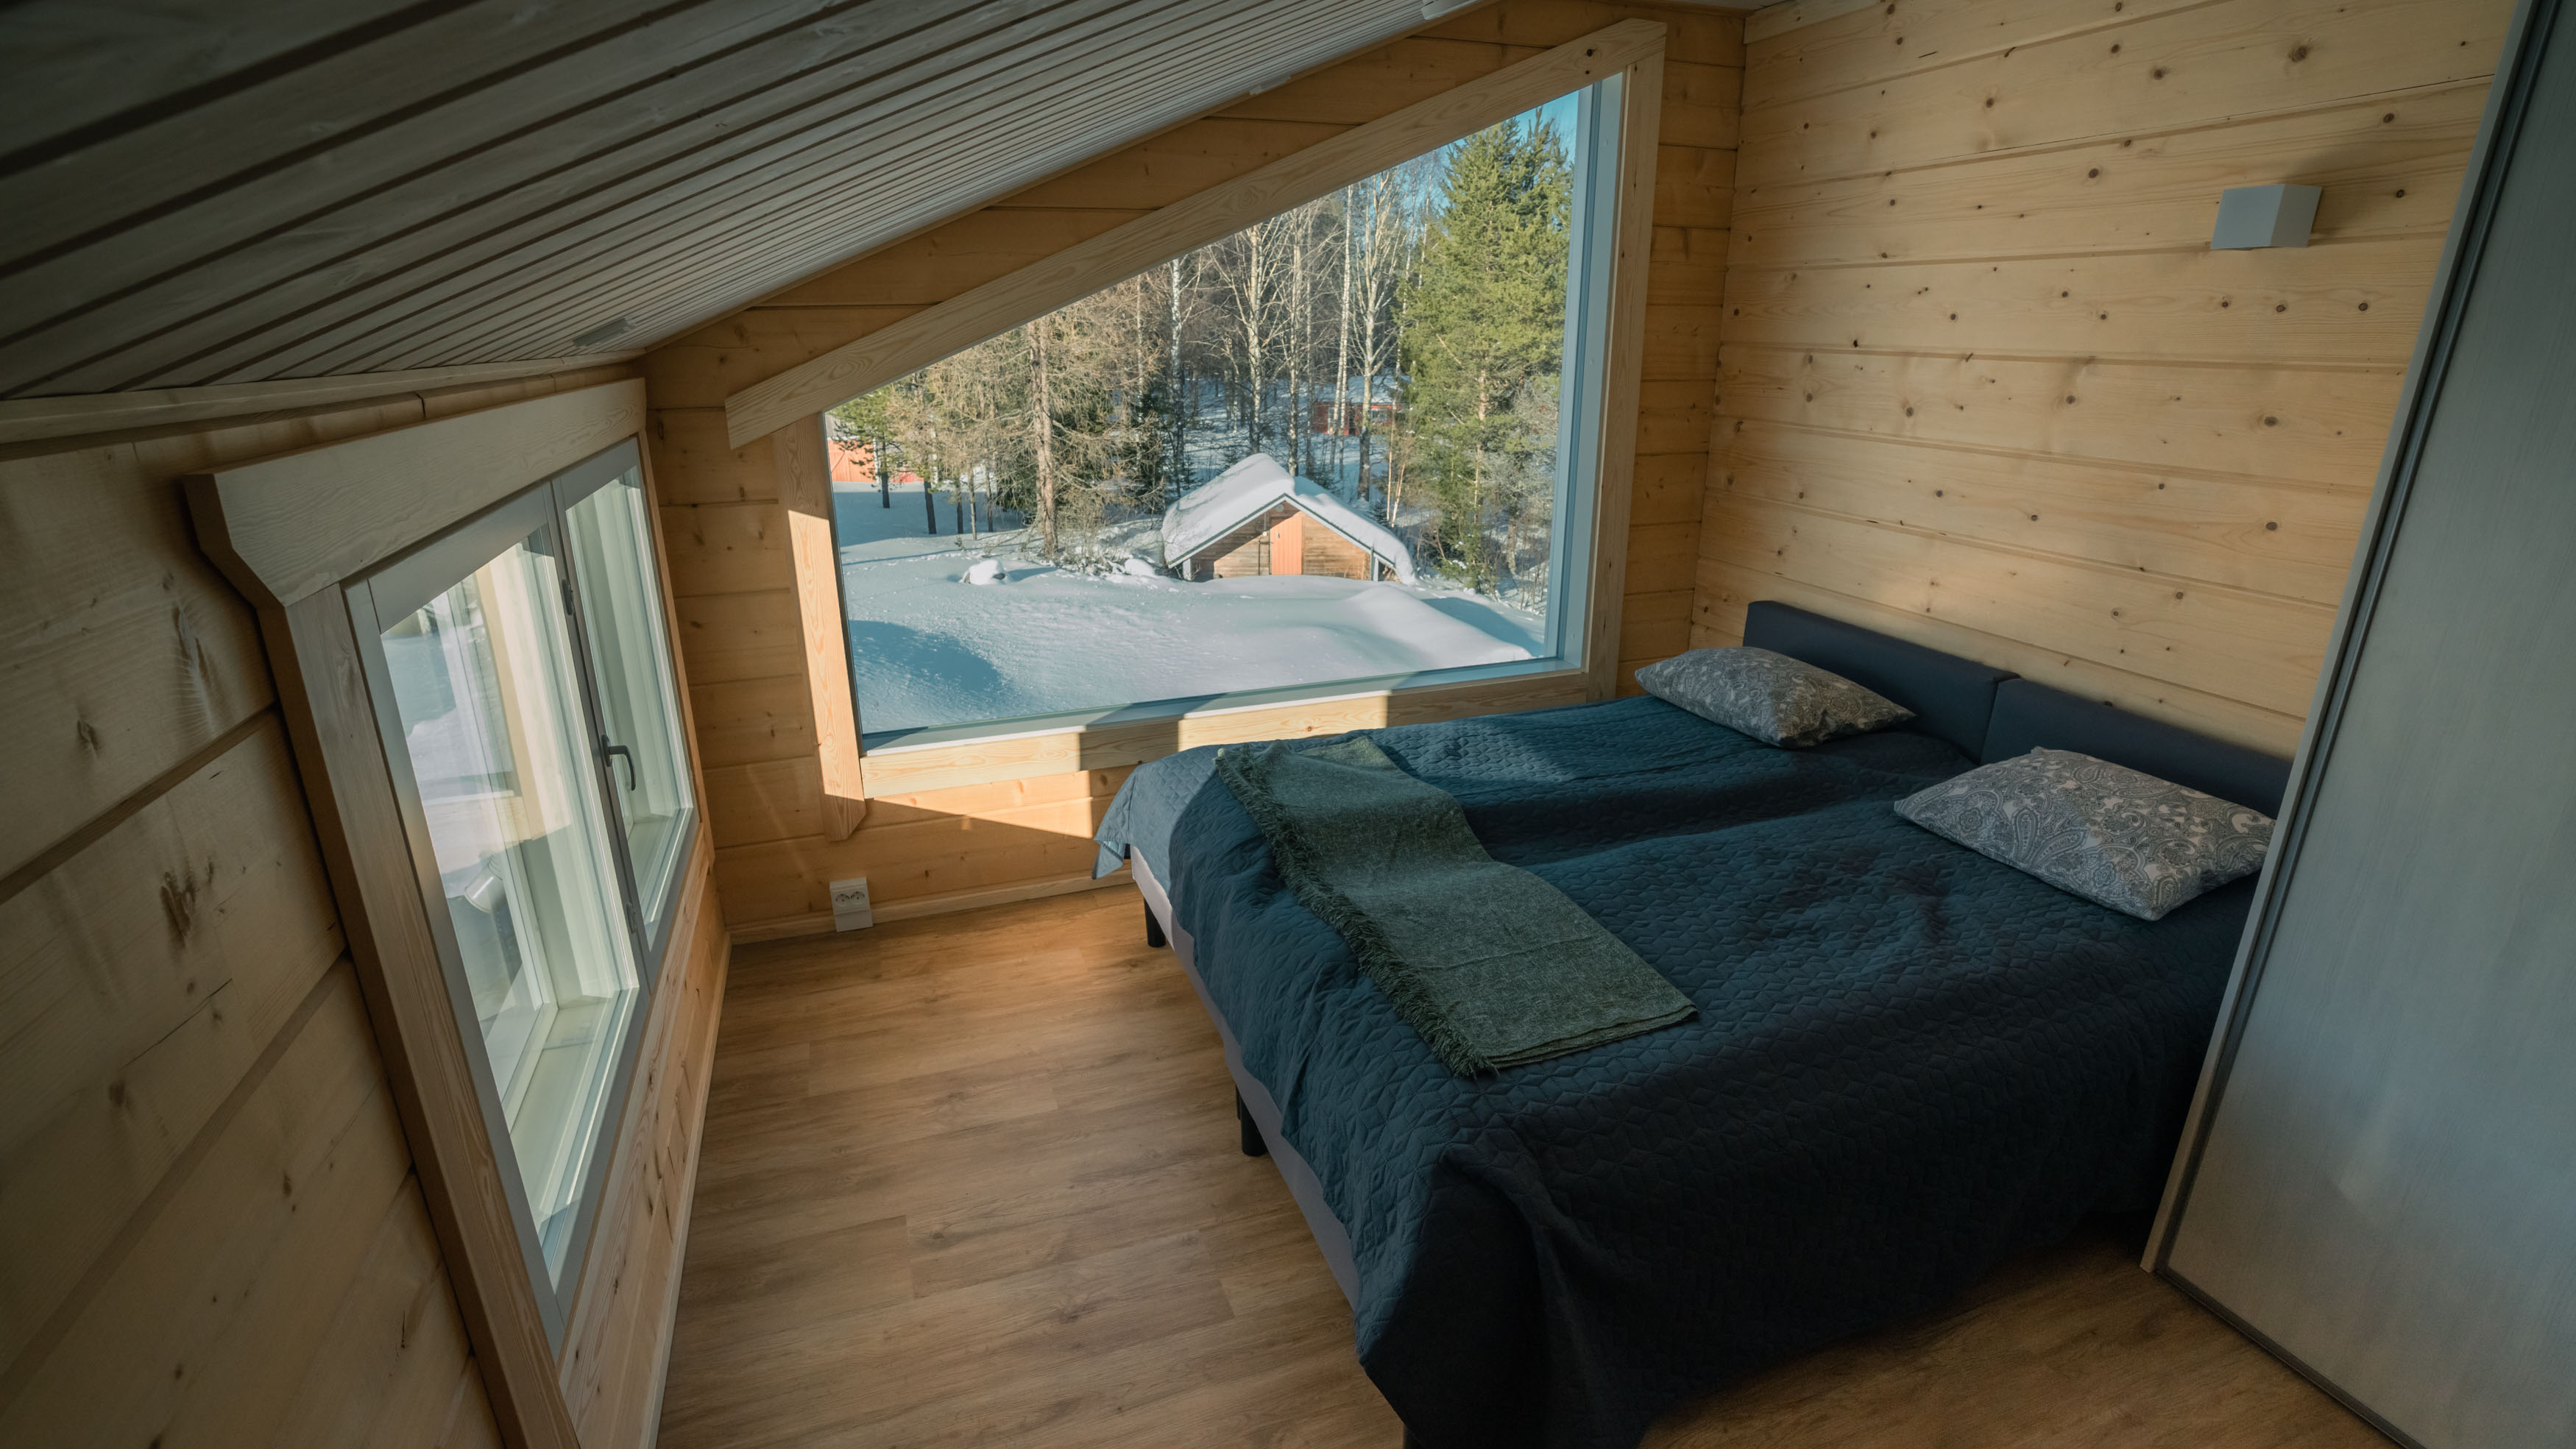 Twin bedroom with a view in Lapland.